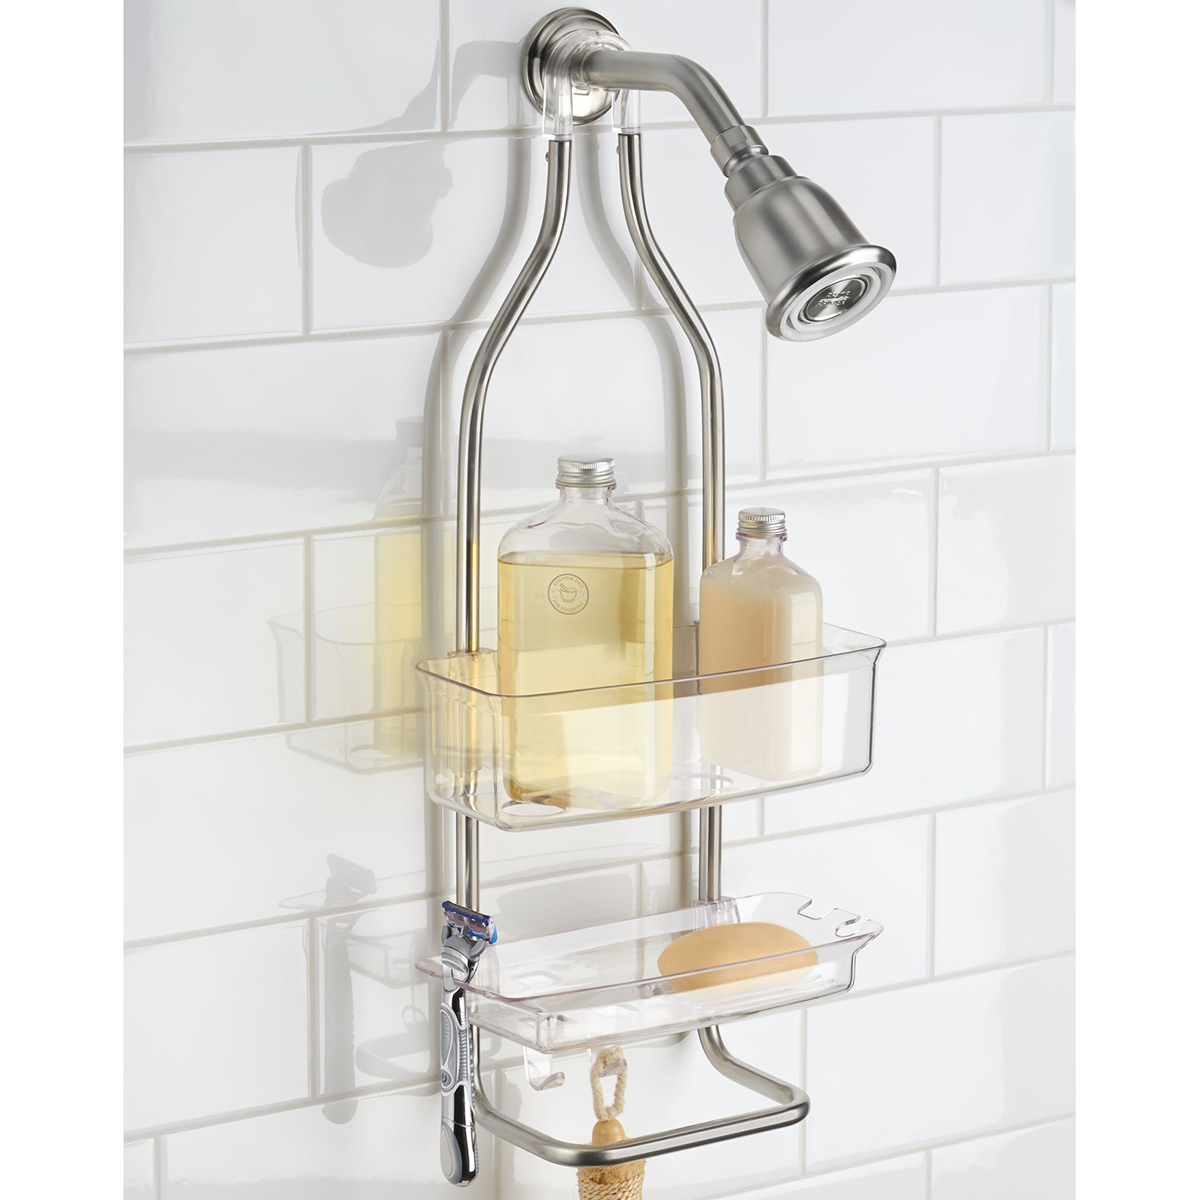 https://www.containerstore.com/catalogimages/360186/10073839-Simplex-Shower-Caddy-VEN.jpg